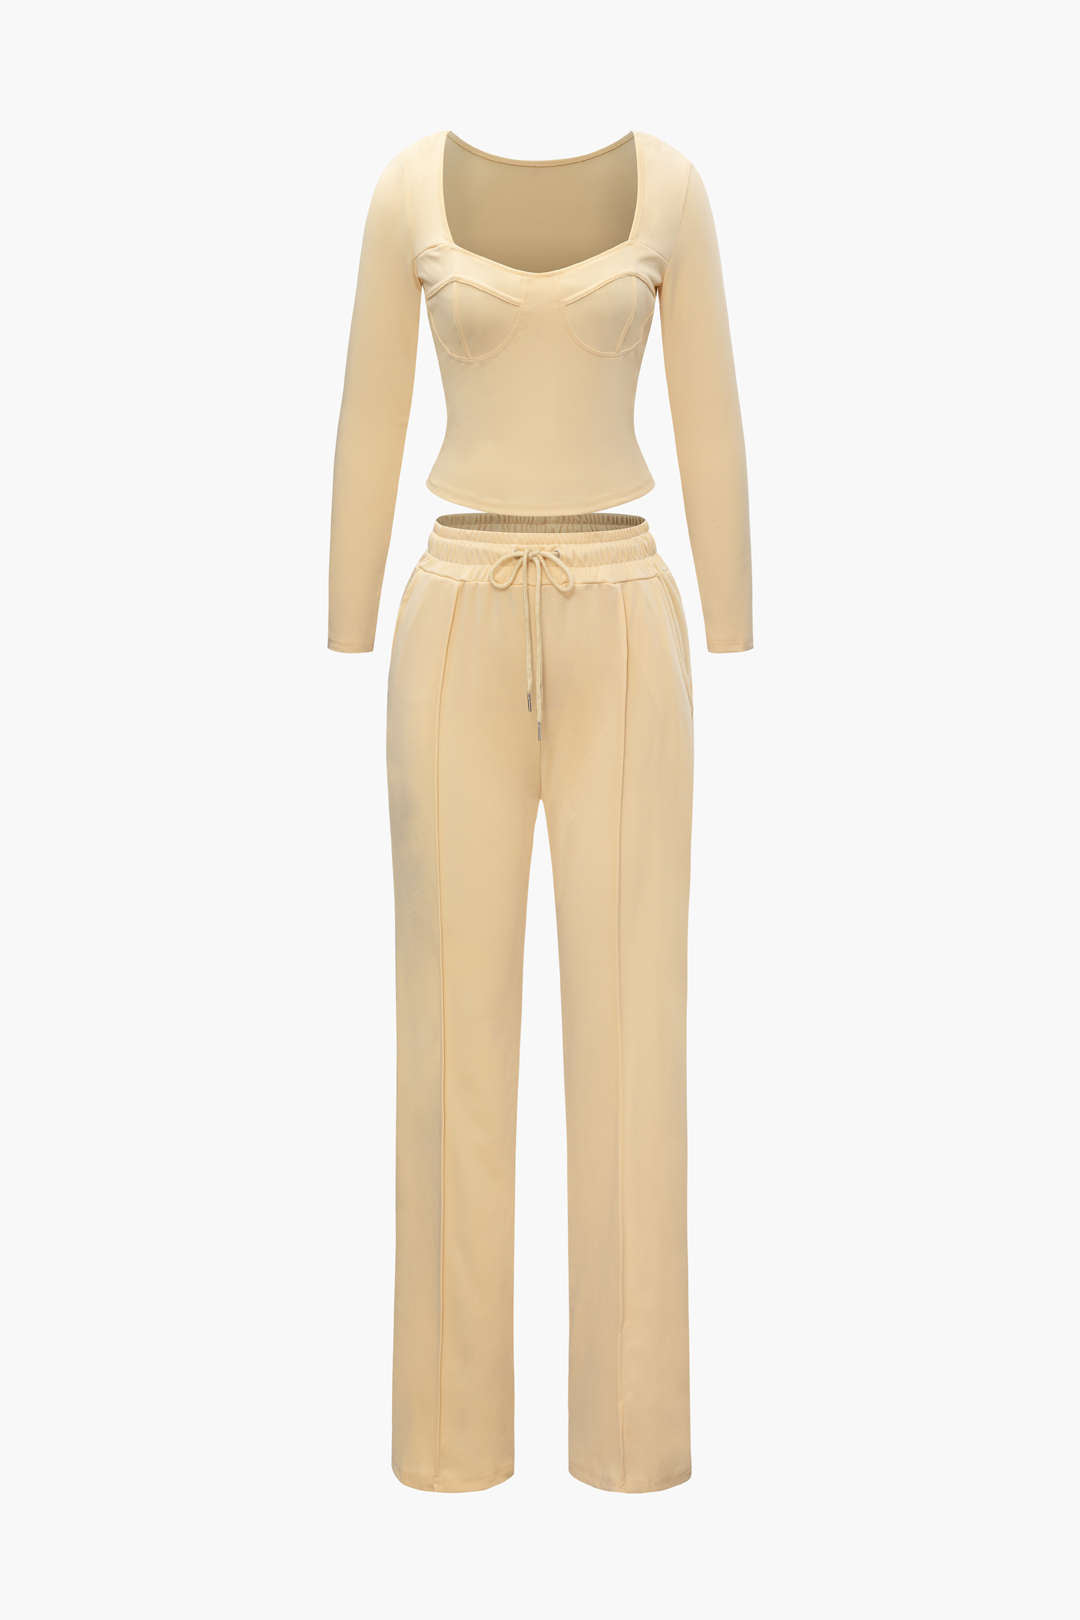 Square Neck Long Sleeve Top And Tie Waist Pants Set